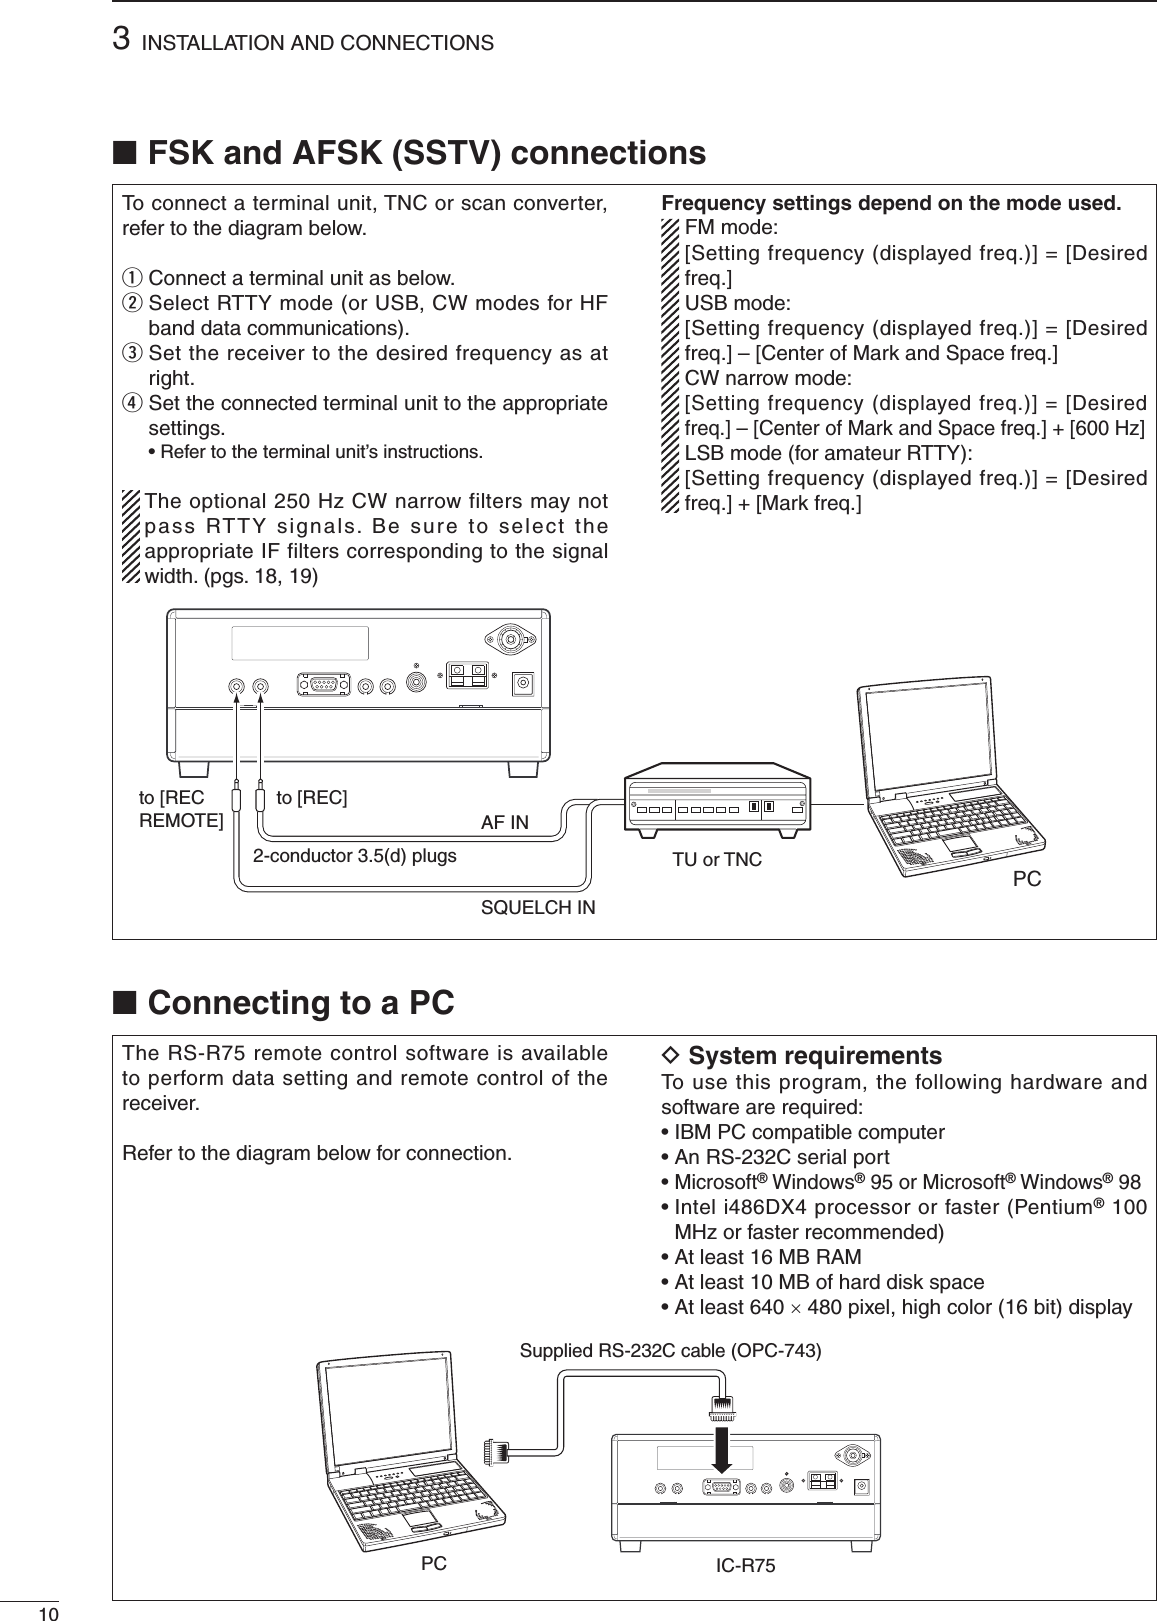 103INSTALLATION AND CONNECTIONS■ Connecting to a PCTo connect a terminal unit, TNC or scan converter, refer to the diagram below.q Connect a terminal unit as below.w  Select RTTY mode (or USB, CW modes for HF band data communications).e  Set the receiver to the desired frequency as at right.r  Set the connected terminal unit to the appropriate settings.  • Refer to the terminal unit’s instructions.  The optional 250 Hz CW narrow filters may not pass RTTY signals. Be sure to select the appropriate IF filters corresponding to the signal width. (pgs. 18, 19)Frequency settings depend on the mode used.  FM mode:   [Setting frequency (displayed freq.)] = [Desired freq.] USB mode:   [Setting frequency (displayed freq.)] = [Desired freq.] – [Center of Mark and Space freq.] CW narrow mode:   [Setting frequency (displayed freq.)] = [Desired freq.] – [Center of Mark and Space freq.] + [600 Hz]  LSB mode (for amateur RTTY):   [Setting frequency (displayed freq.)] = [Desired freq.] + [Mark freq.]The RS-R75 remote control software is available to perform data setting and remote control of the receiver.Refer to the diagram below for connection.D System requirementsTo use this program, the following hardware and software are required:• IBM PC compatible computer• An RS-232C serial port•  Microsoft® Windows® 95 or Microsoft® Windows® 98•  Intel i486DX4 processor or faster (Pentium® 100 MHz or faster recommended)• At least 16 MB RAM• At least 10 MB of hard disk space• At least 640 × 480 pixel, high color (16 bit) display■ FSK and AFSK (SSTV) connectionsTU or TNCAF INSQUELCH INto [REC]to [REC REMOTE]2-conductor 3.5(d) plugsPCPC IC-R75Supplied RS-232C cable (OPC-743)